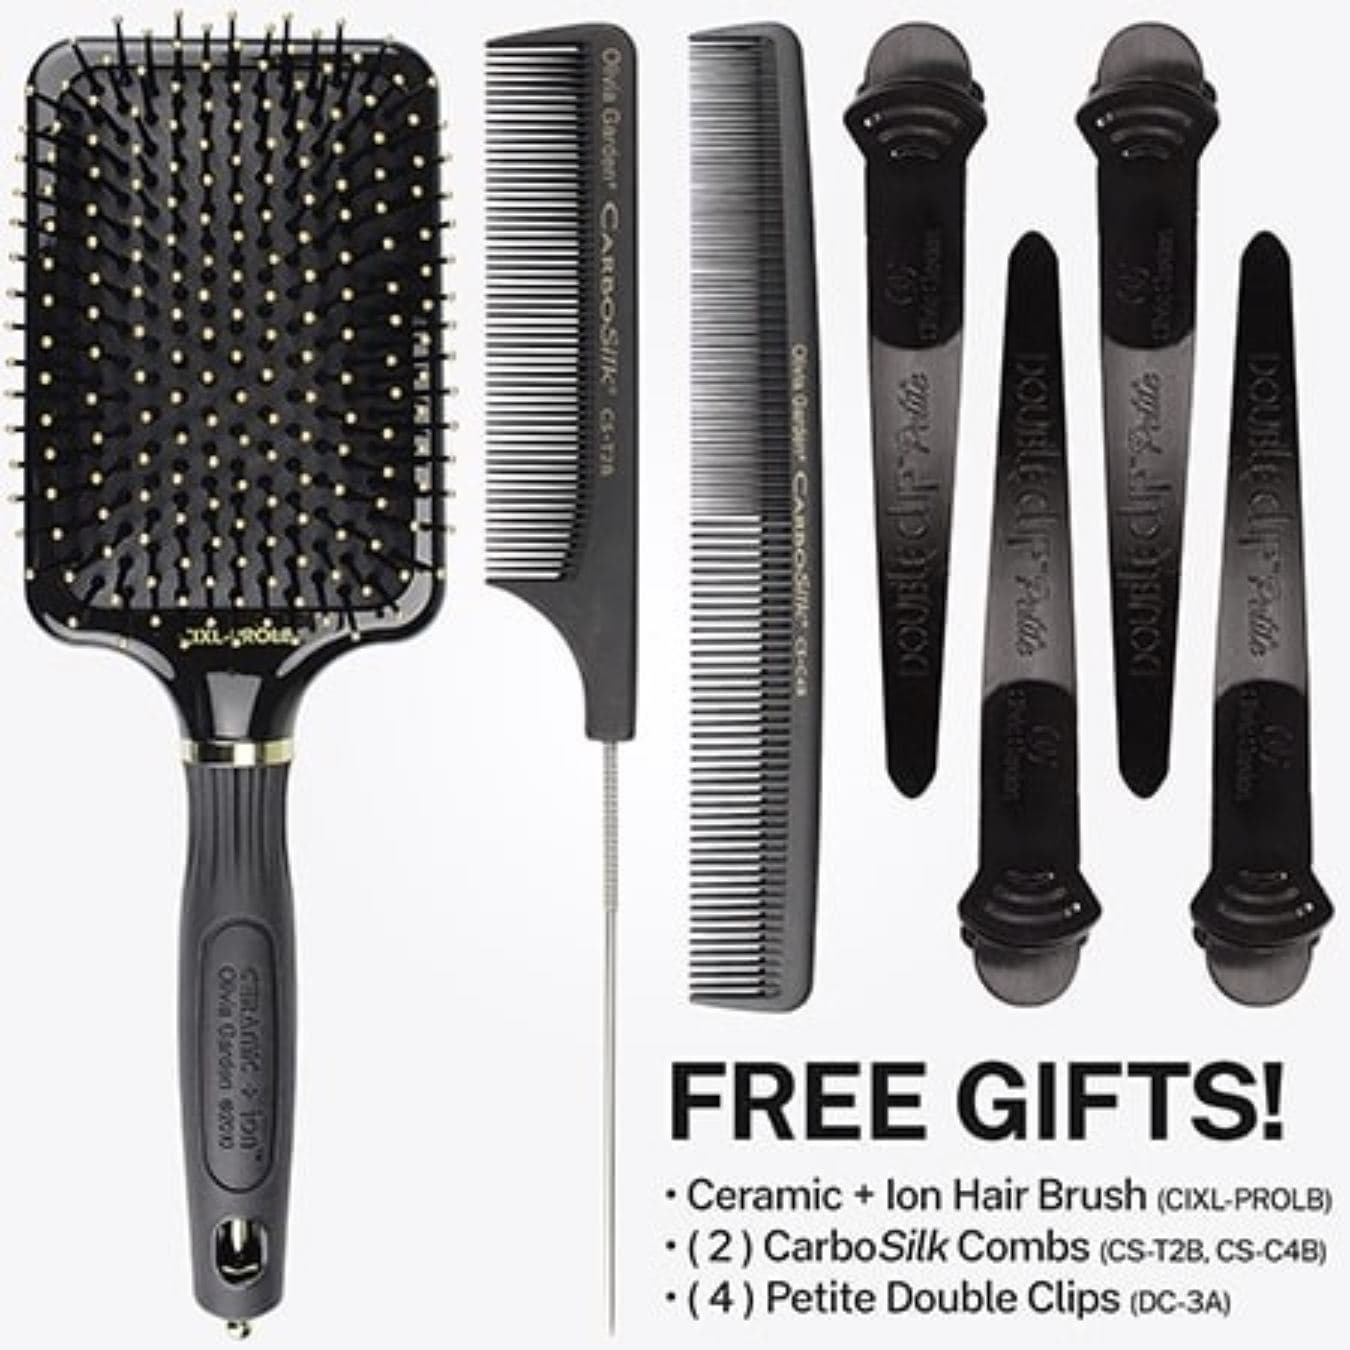 Ceramic + Ion 1" Professional Flat Iron with Free Gifts | CI-FL1DL01 | OLIVIA GARDEN - SH Salons